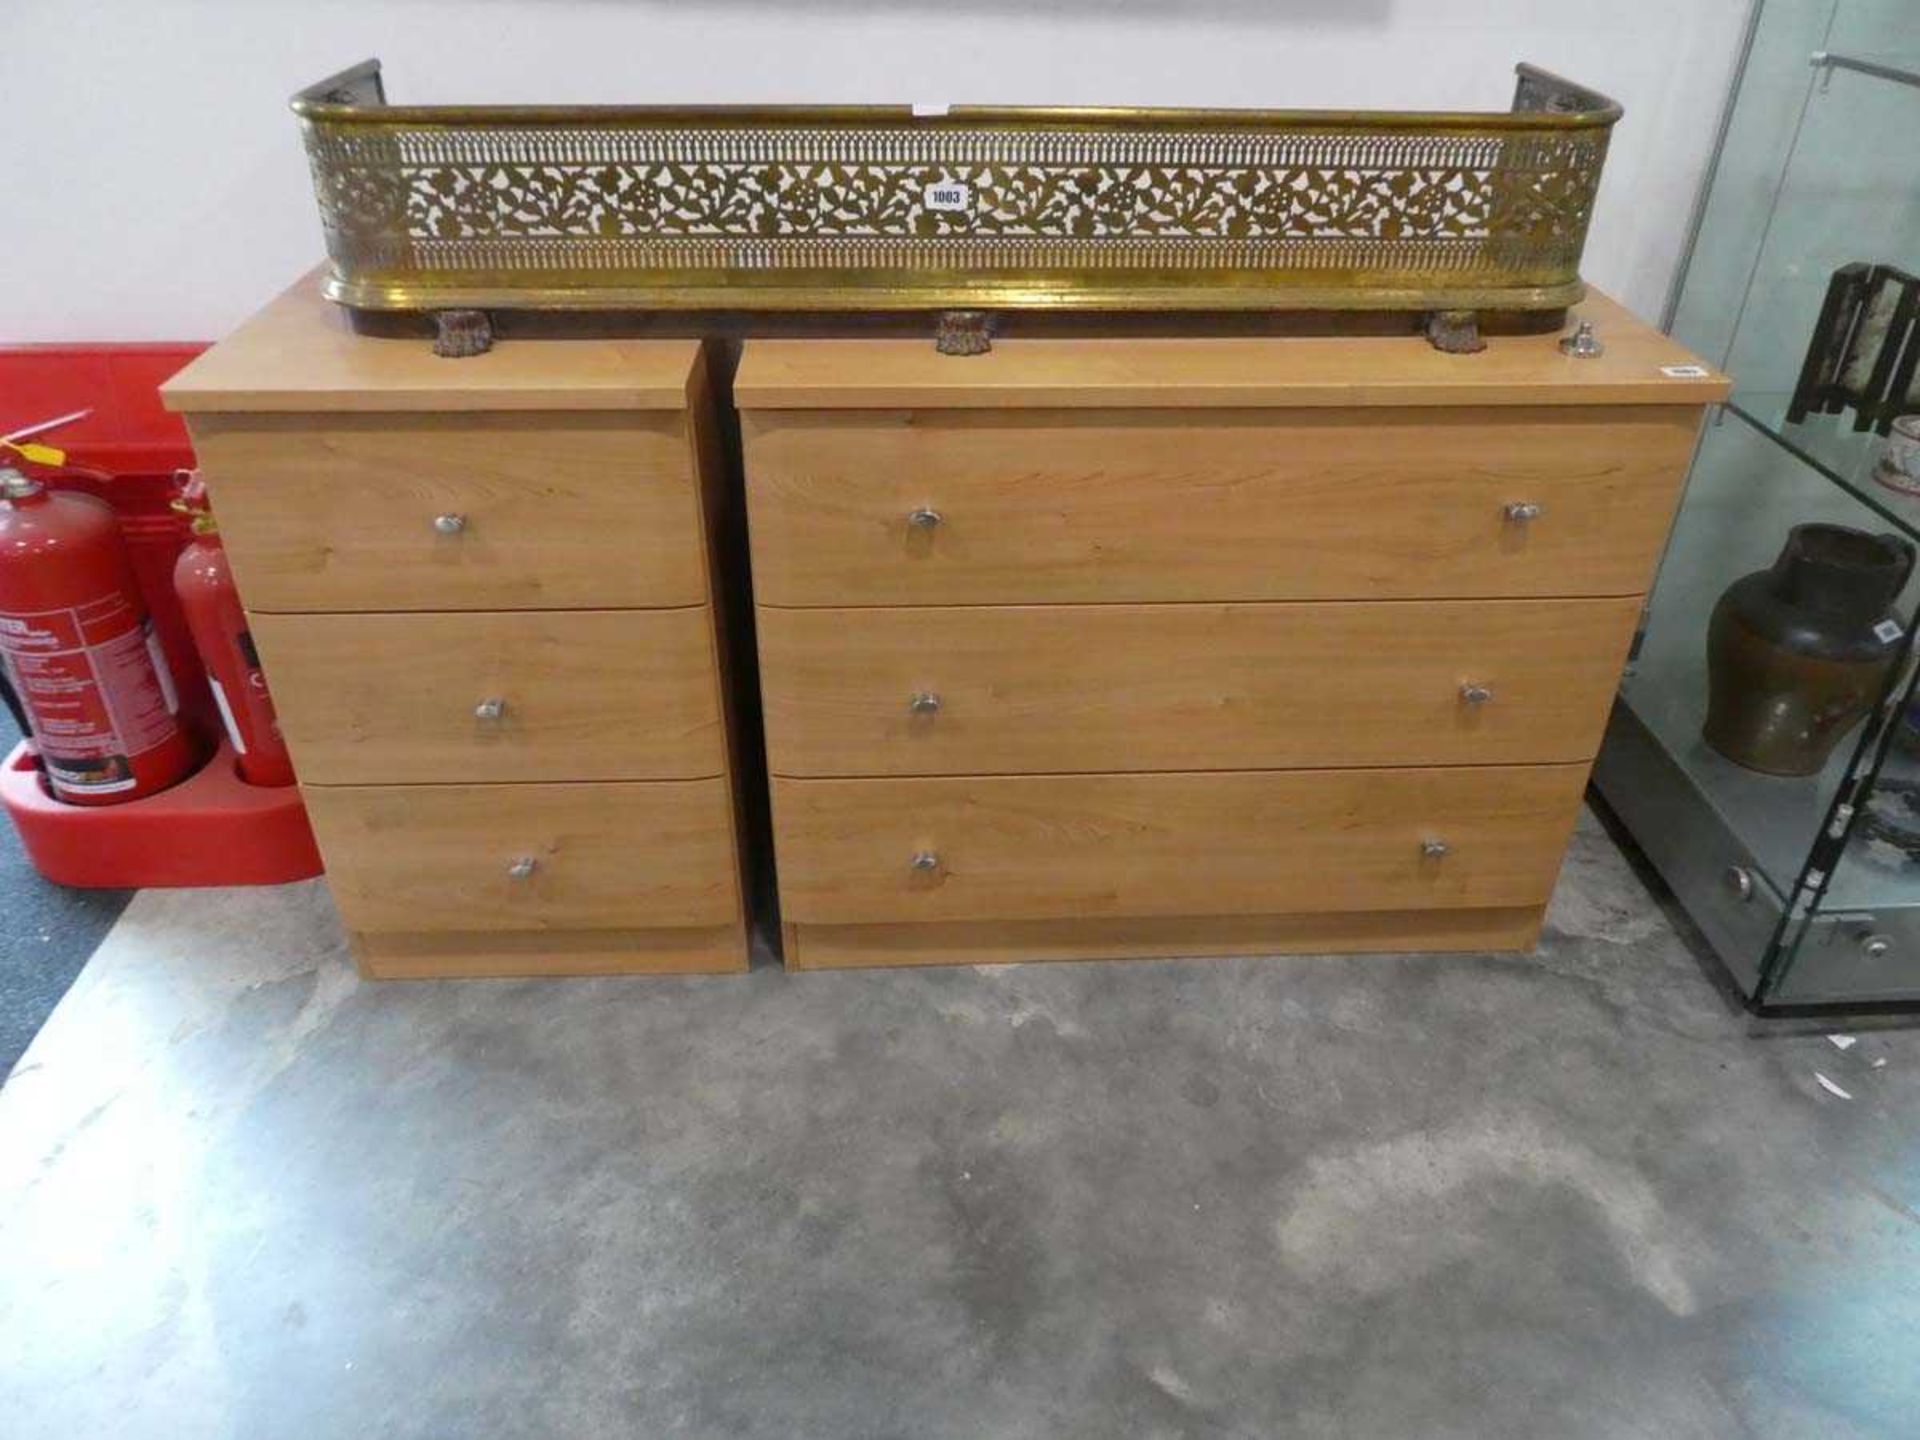 Modern maple effect bedroom suite comprising chest of 3 drawers and matching 3 drawer bedside